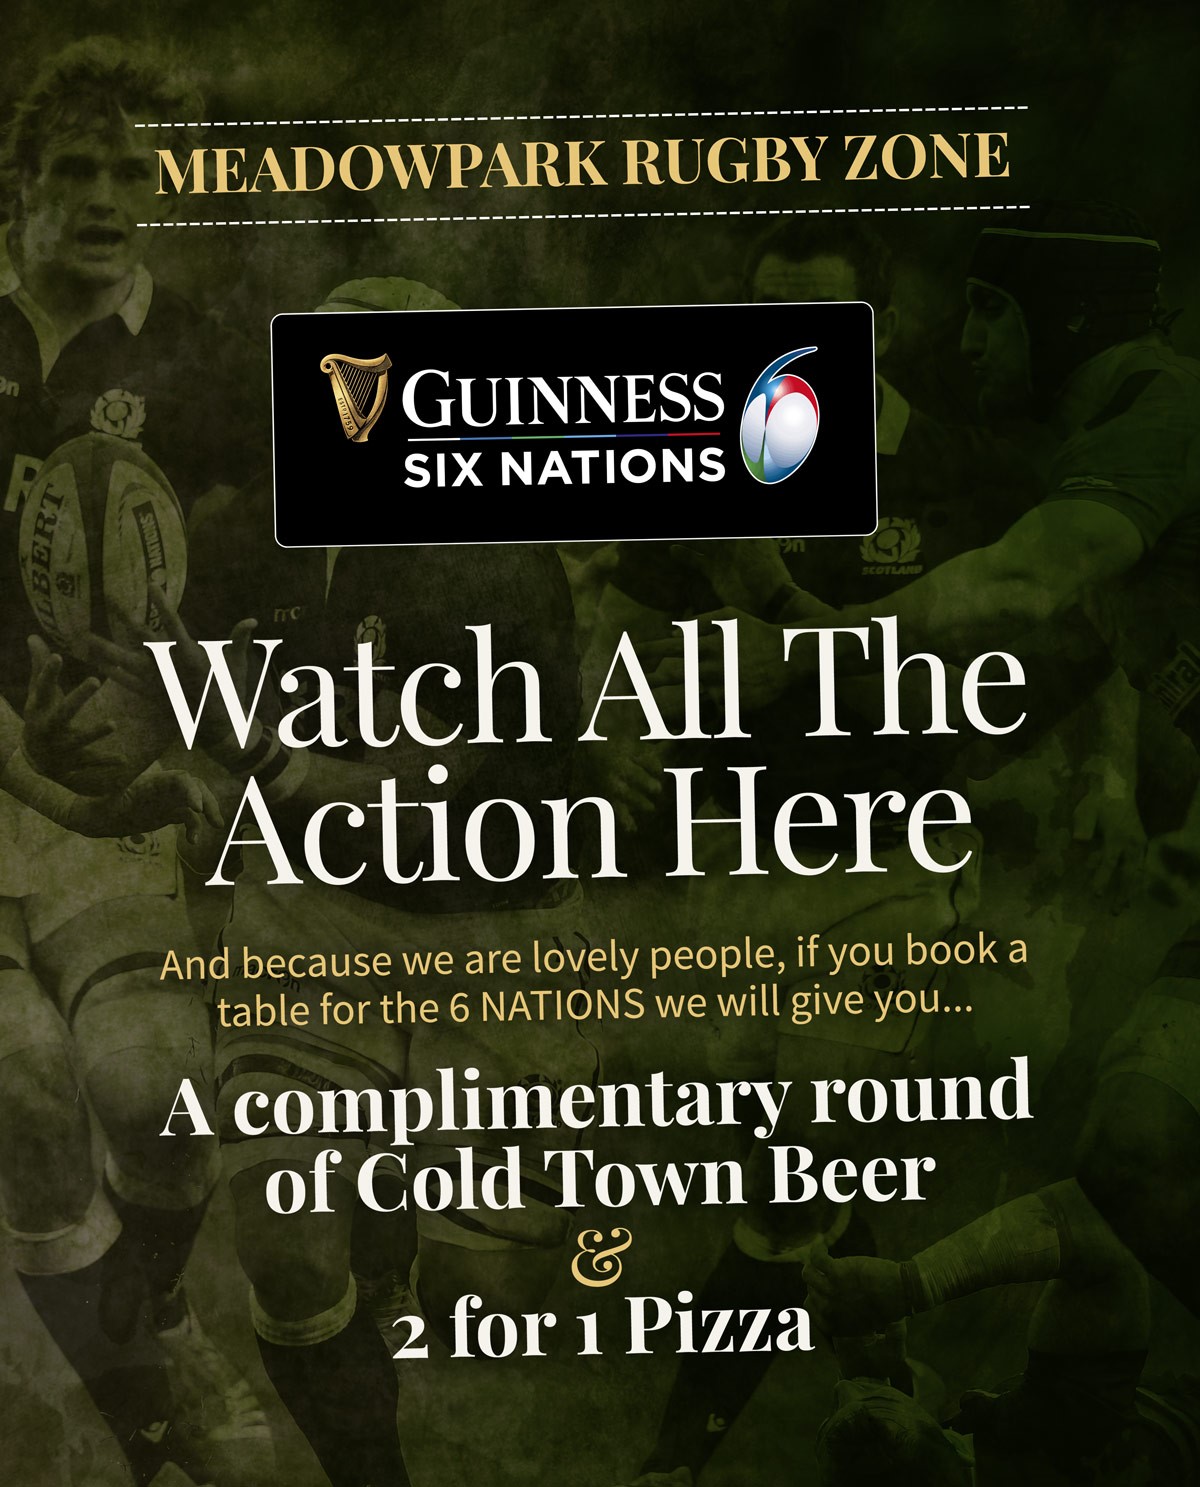 ITS 6 NATIONS SHOWTIME! Join us in The Meadowpark Rugby Zone!